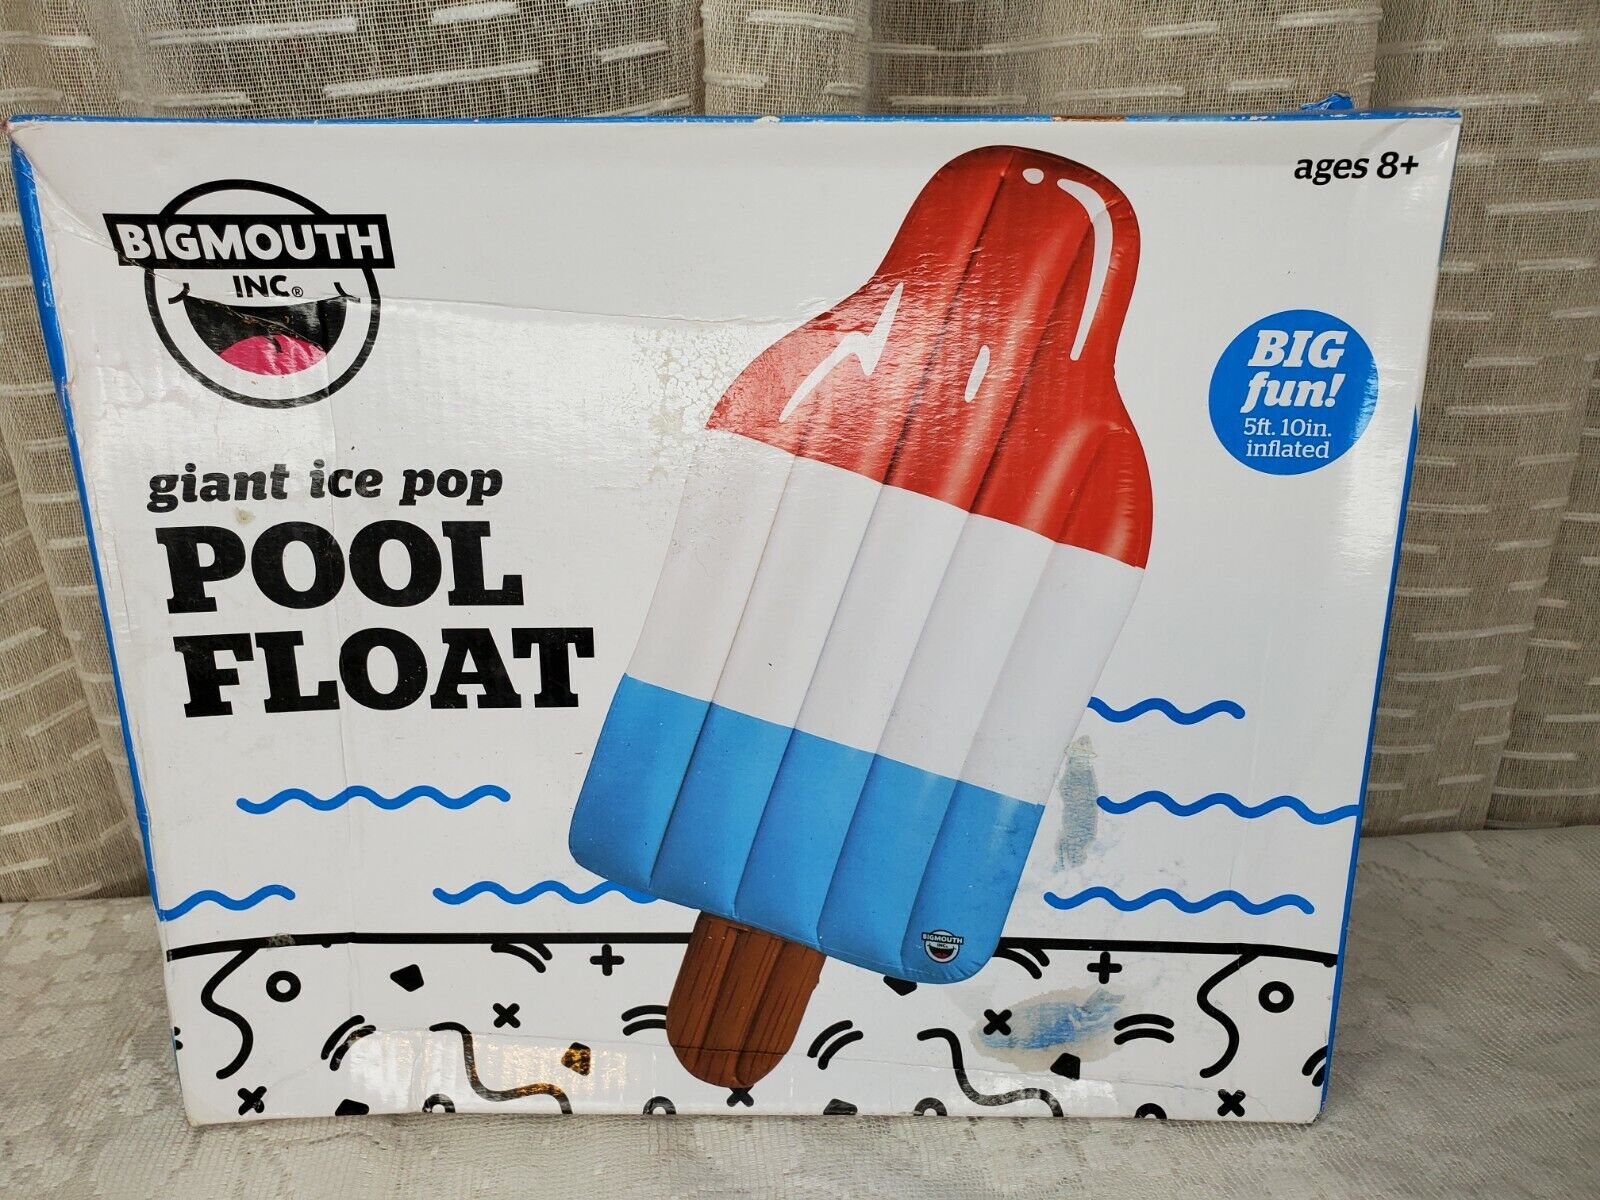 Bigmouth Over 5 ft Giant Ice Pop Pool Float, Sealed